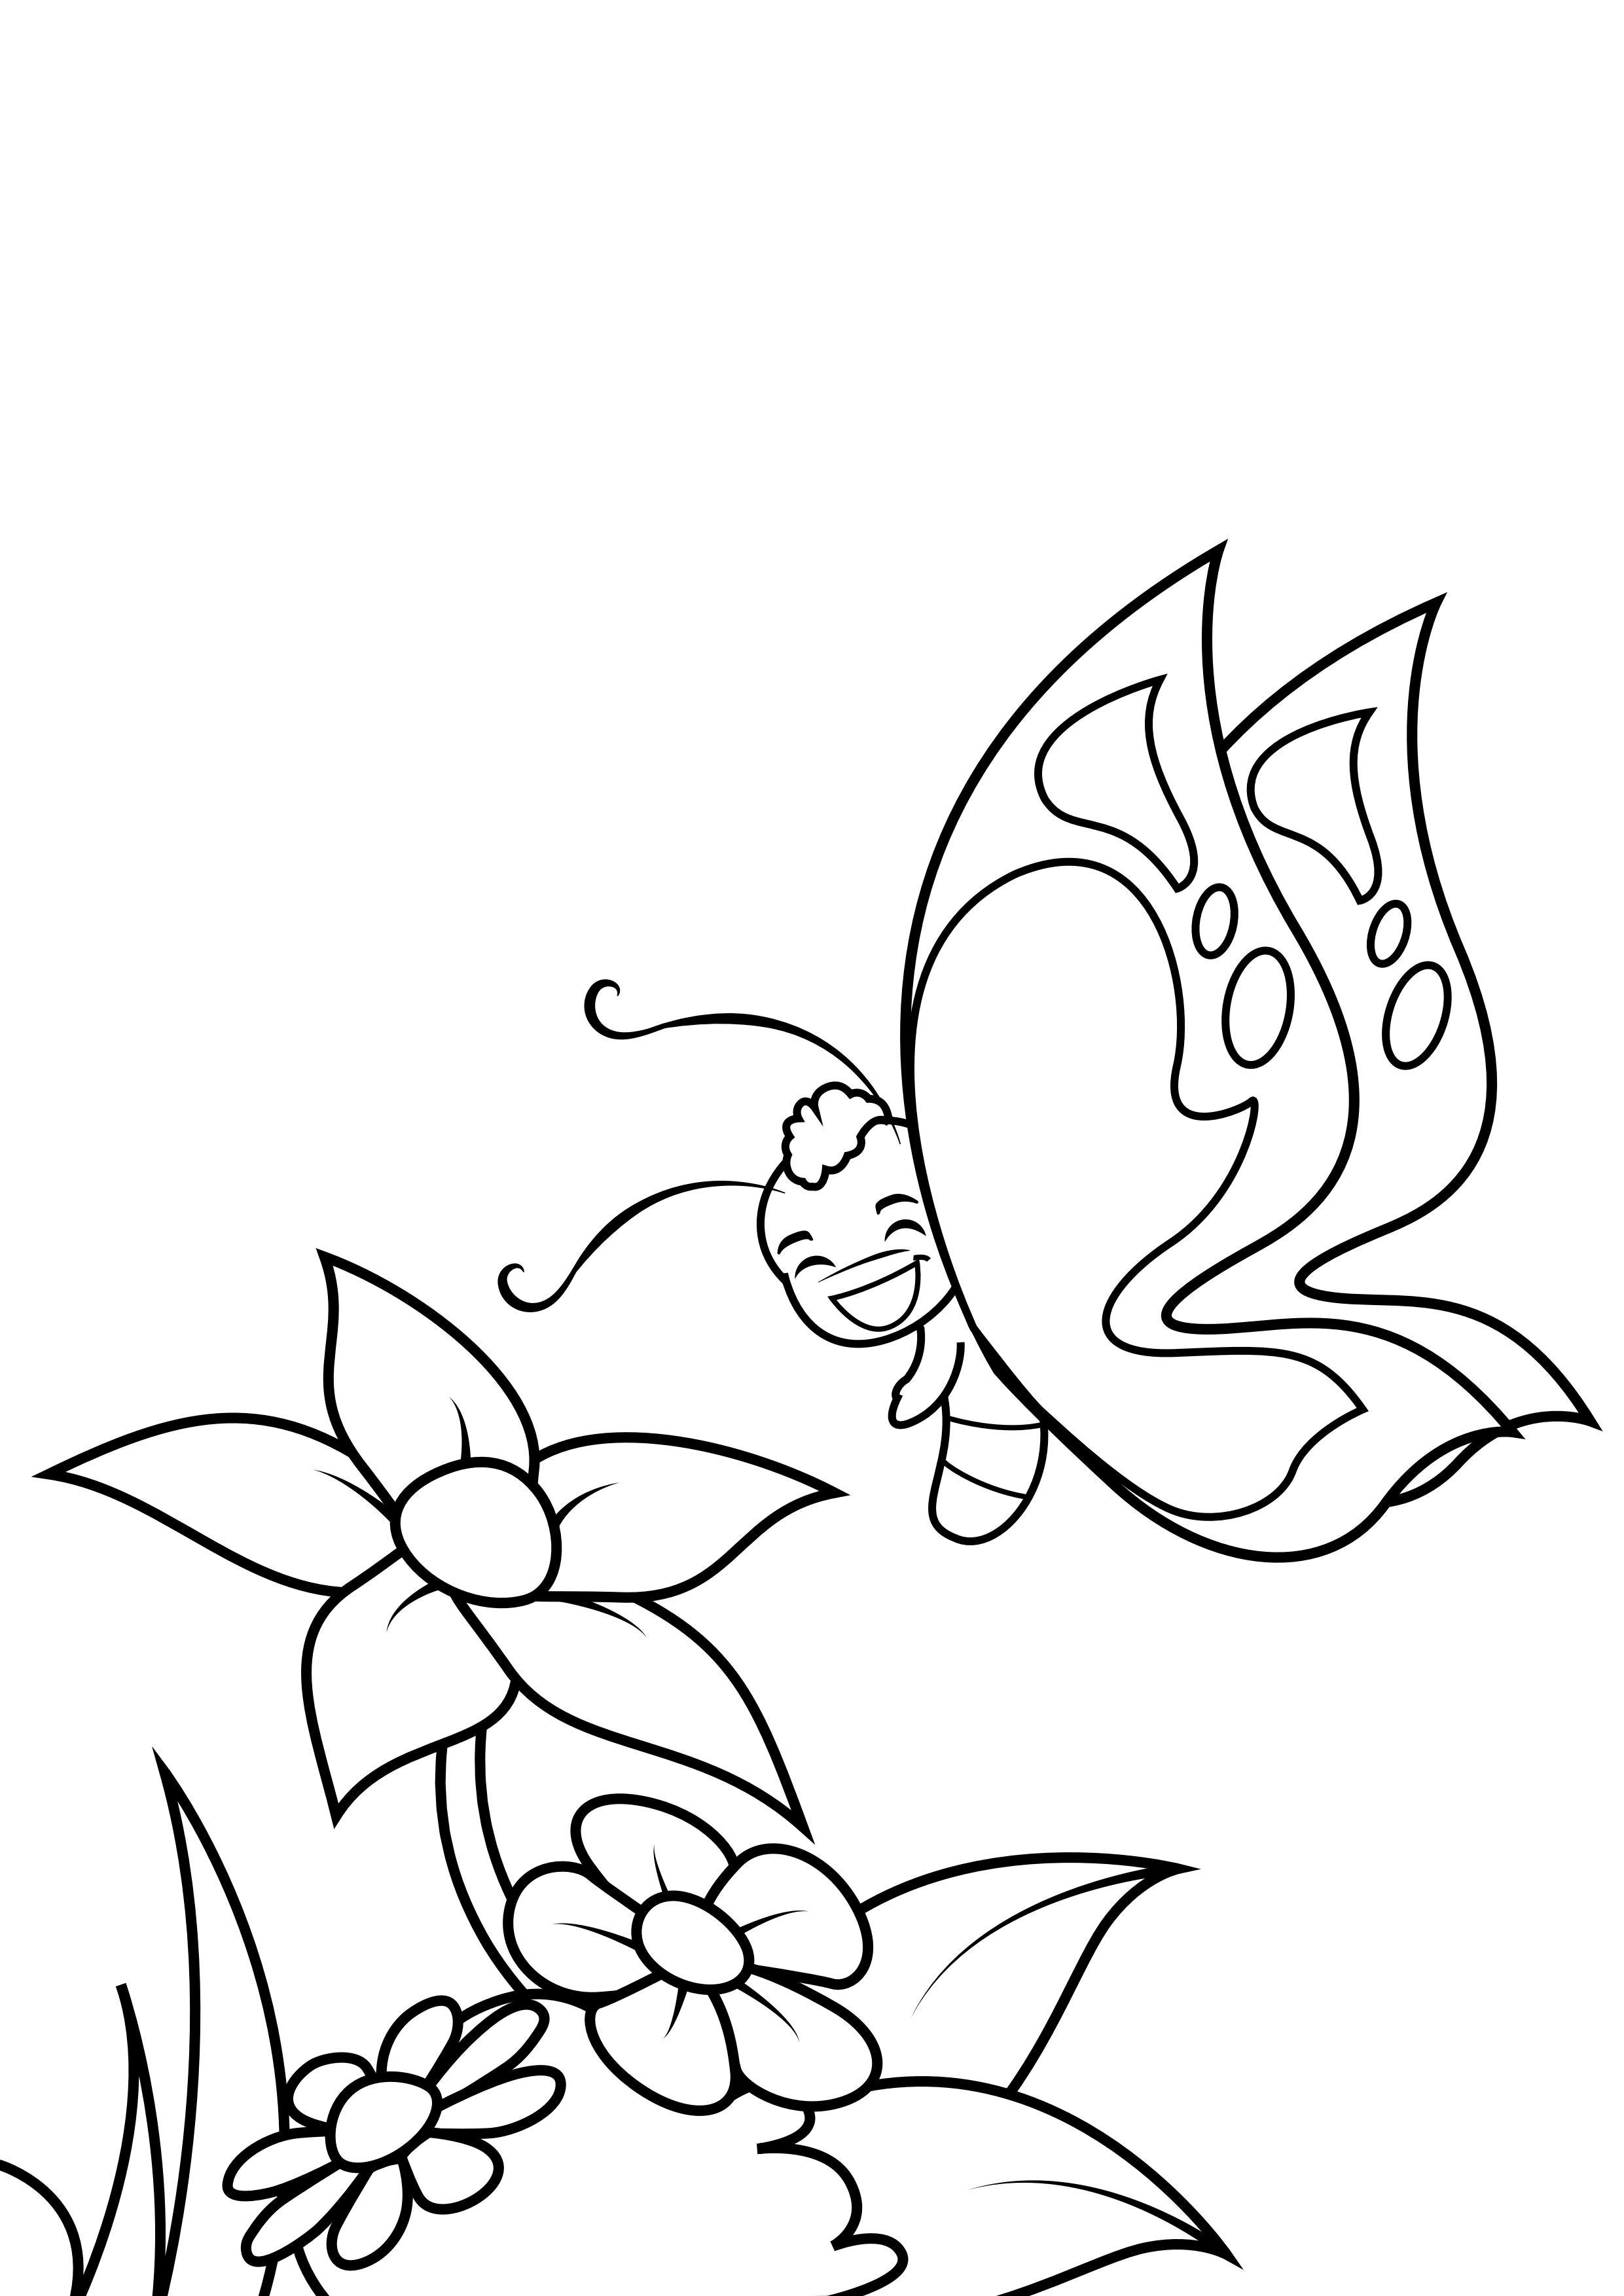 Coloring page butterfly is smiling